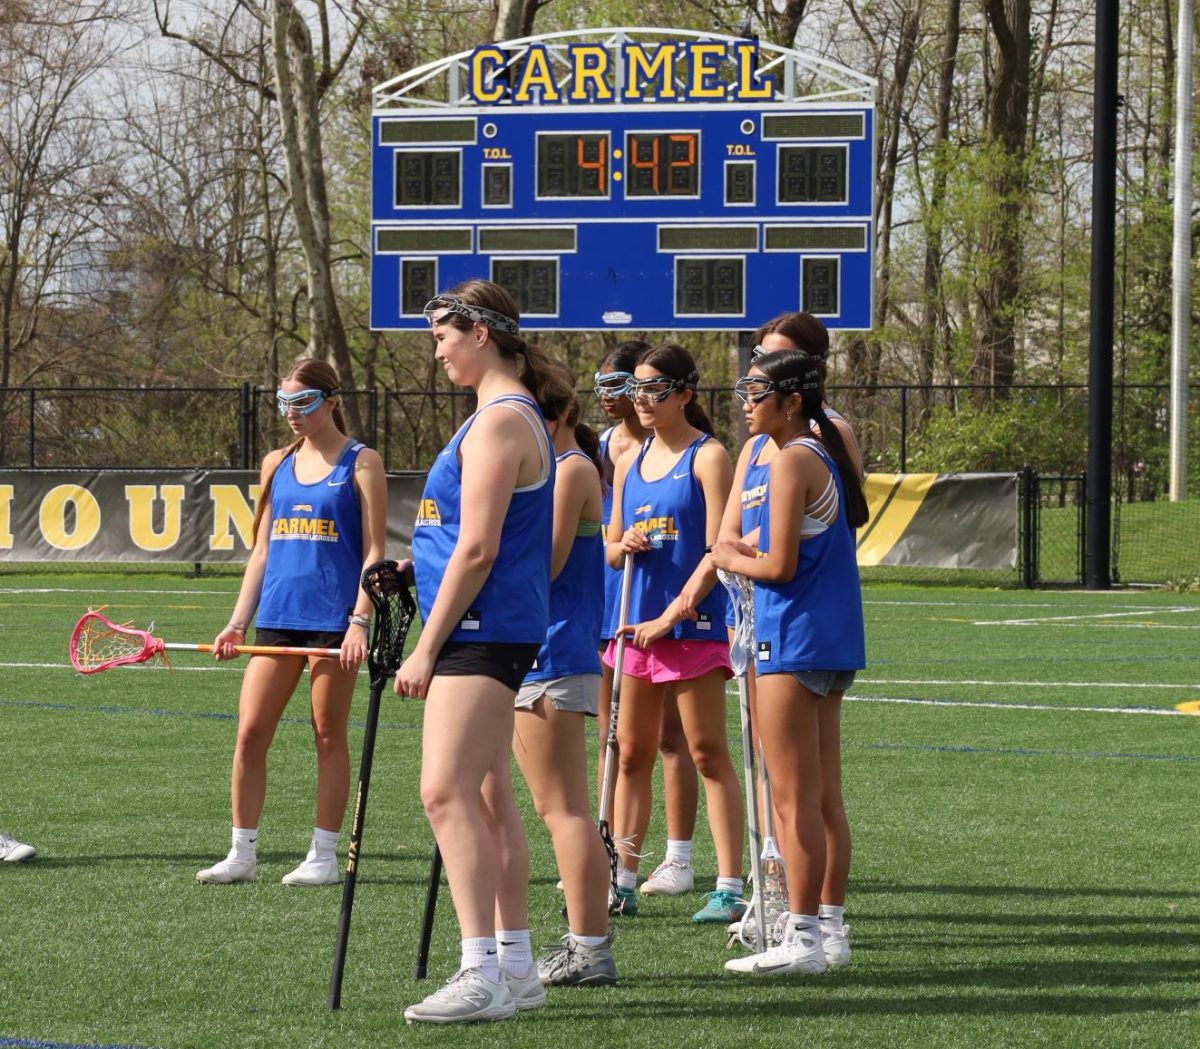 The+women%E2%80%99s+lacrosse+team+practices+on+the+Carmel+field+on+April+18.+Junior+Chloe+Putnam+said+she+feels+the+team+has+done+well+this+season%2C+as+they+have+gone+undefeated+in+in-state+games+this+season.+